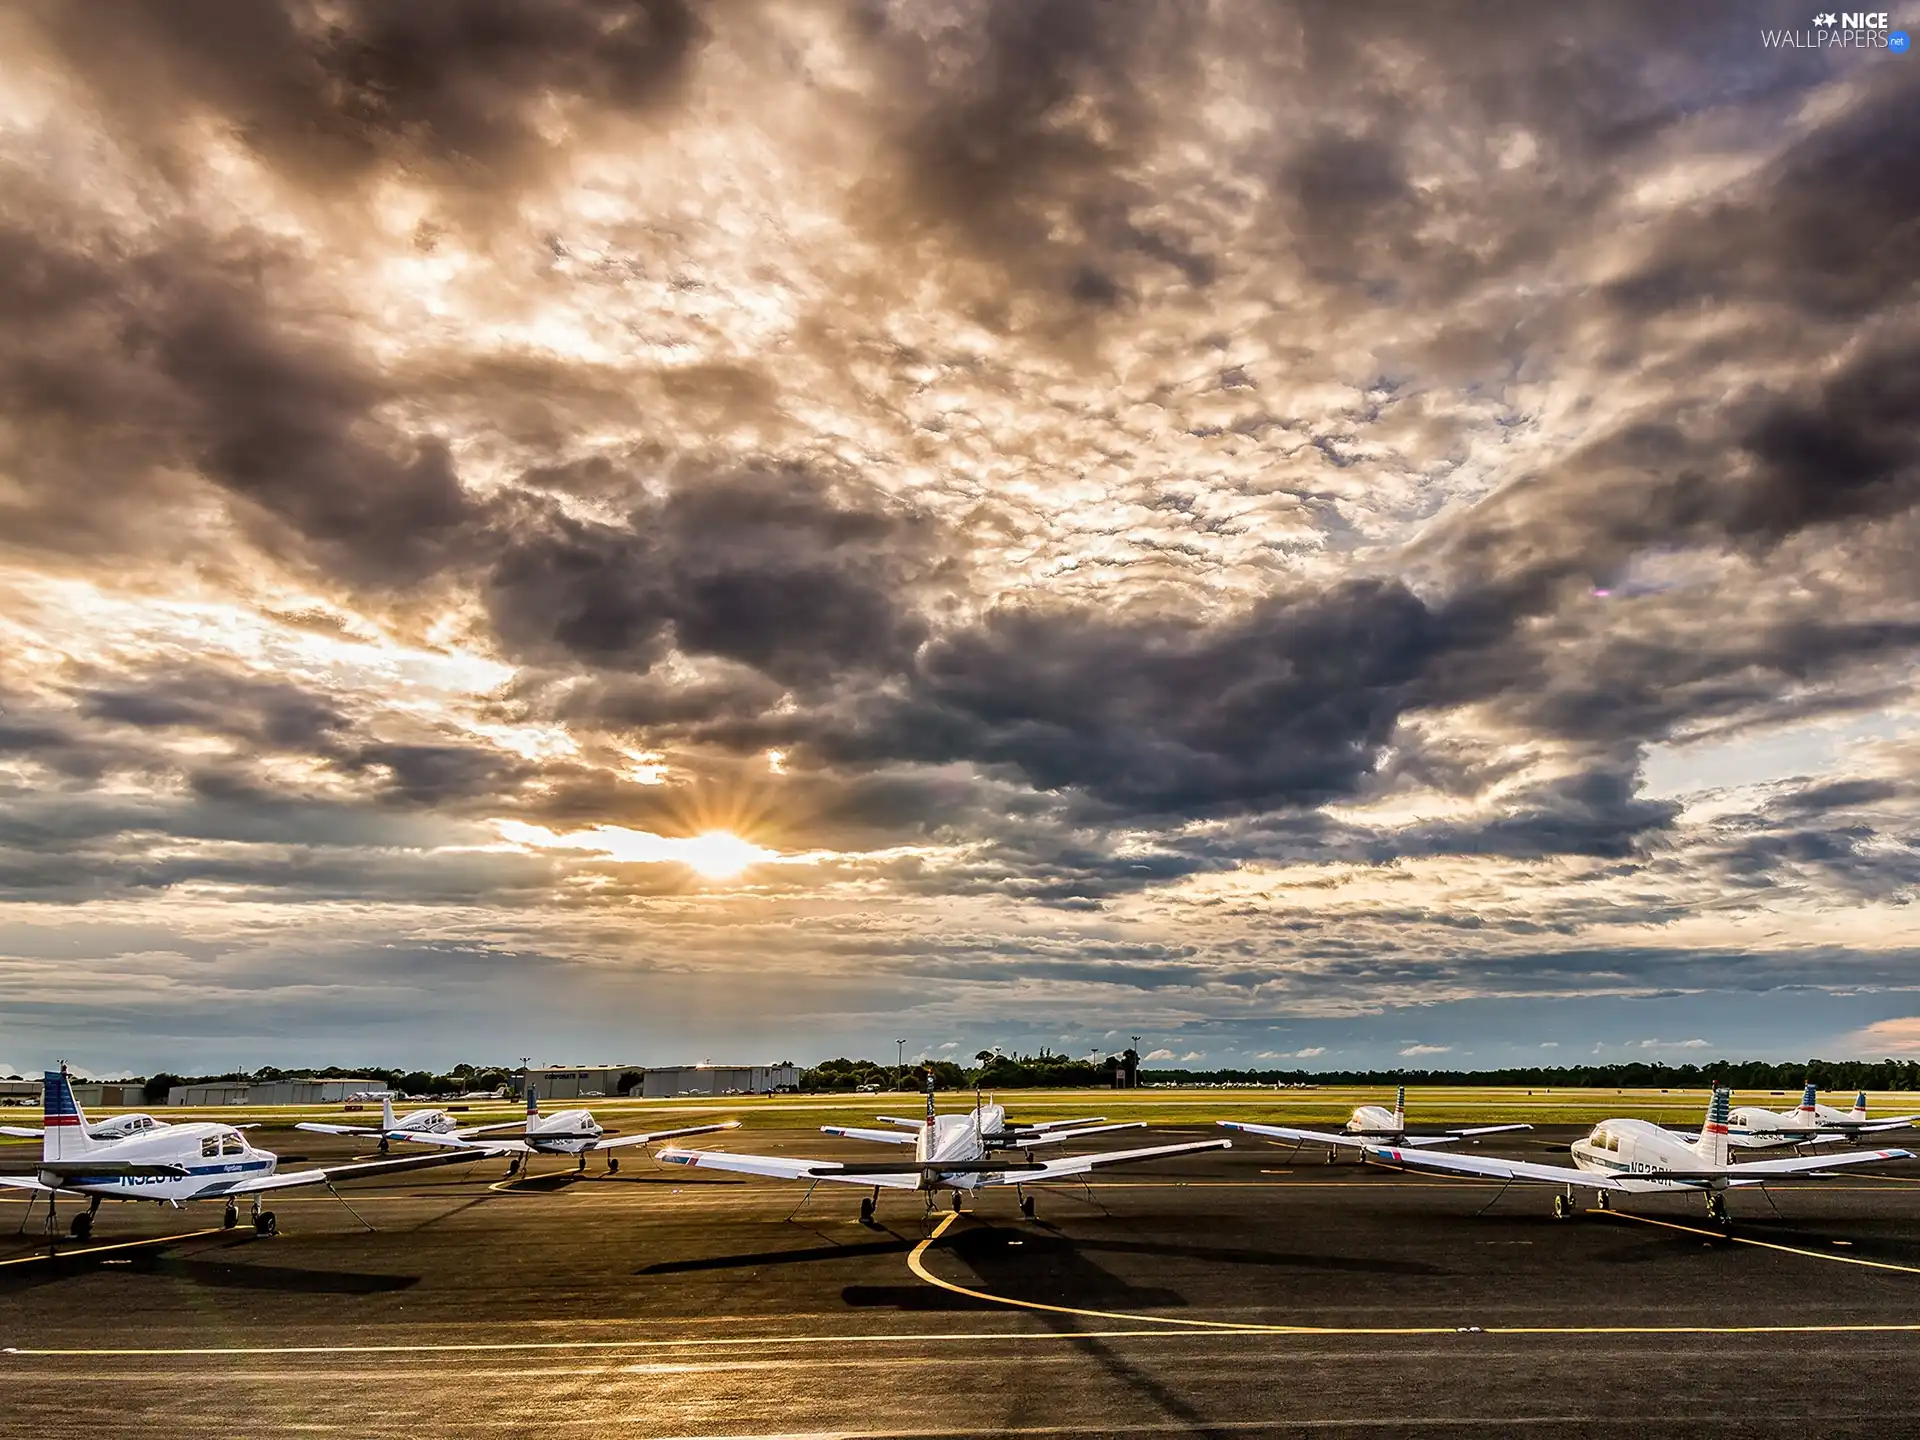 Sky, Planes, airport, clouds